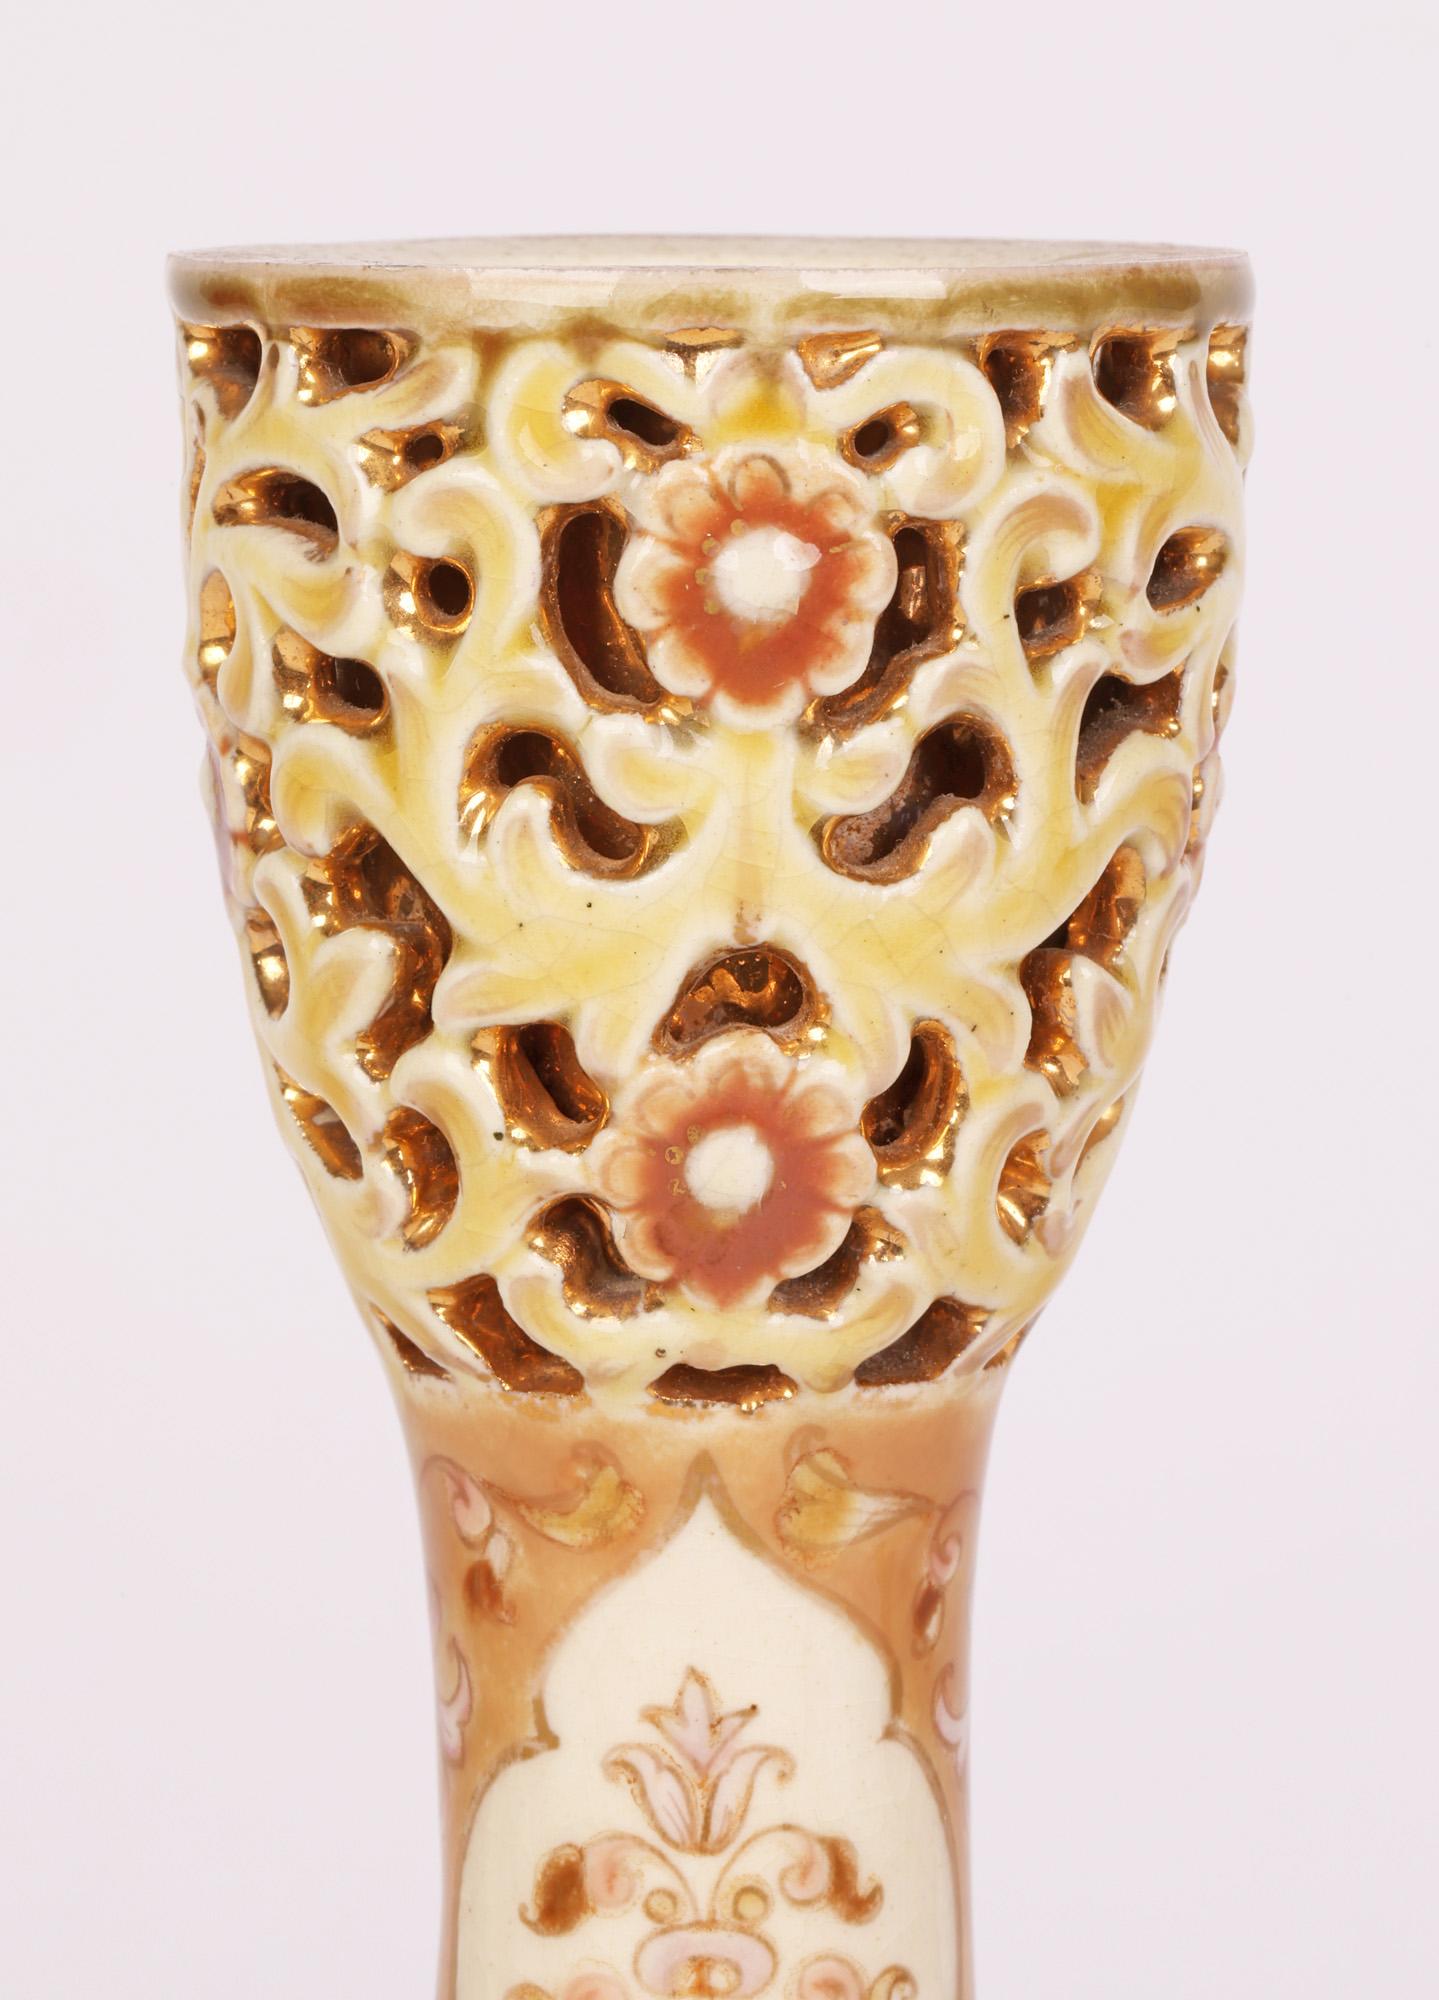 A very stylish and elegant Hungarian porcelain vase hand painted with Islamic influence floral designs by renowned maker Zsolnay and dating from around 1890. The vase stands raised on a shaped reticulated petal shaped base with round gourd shaped